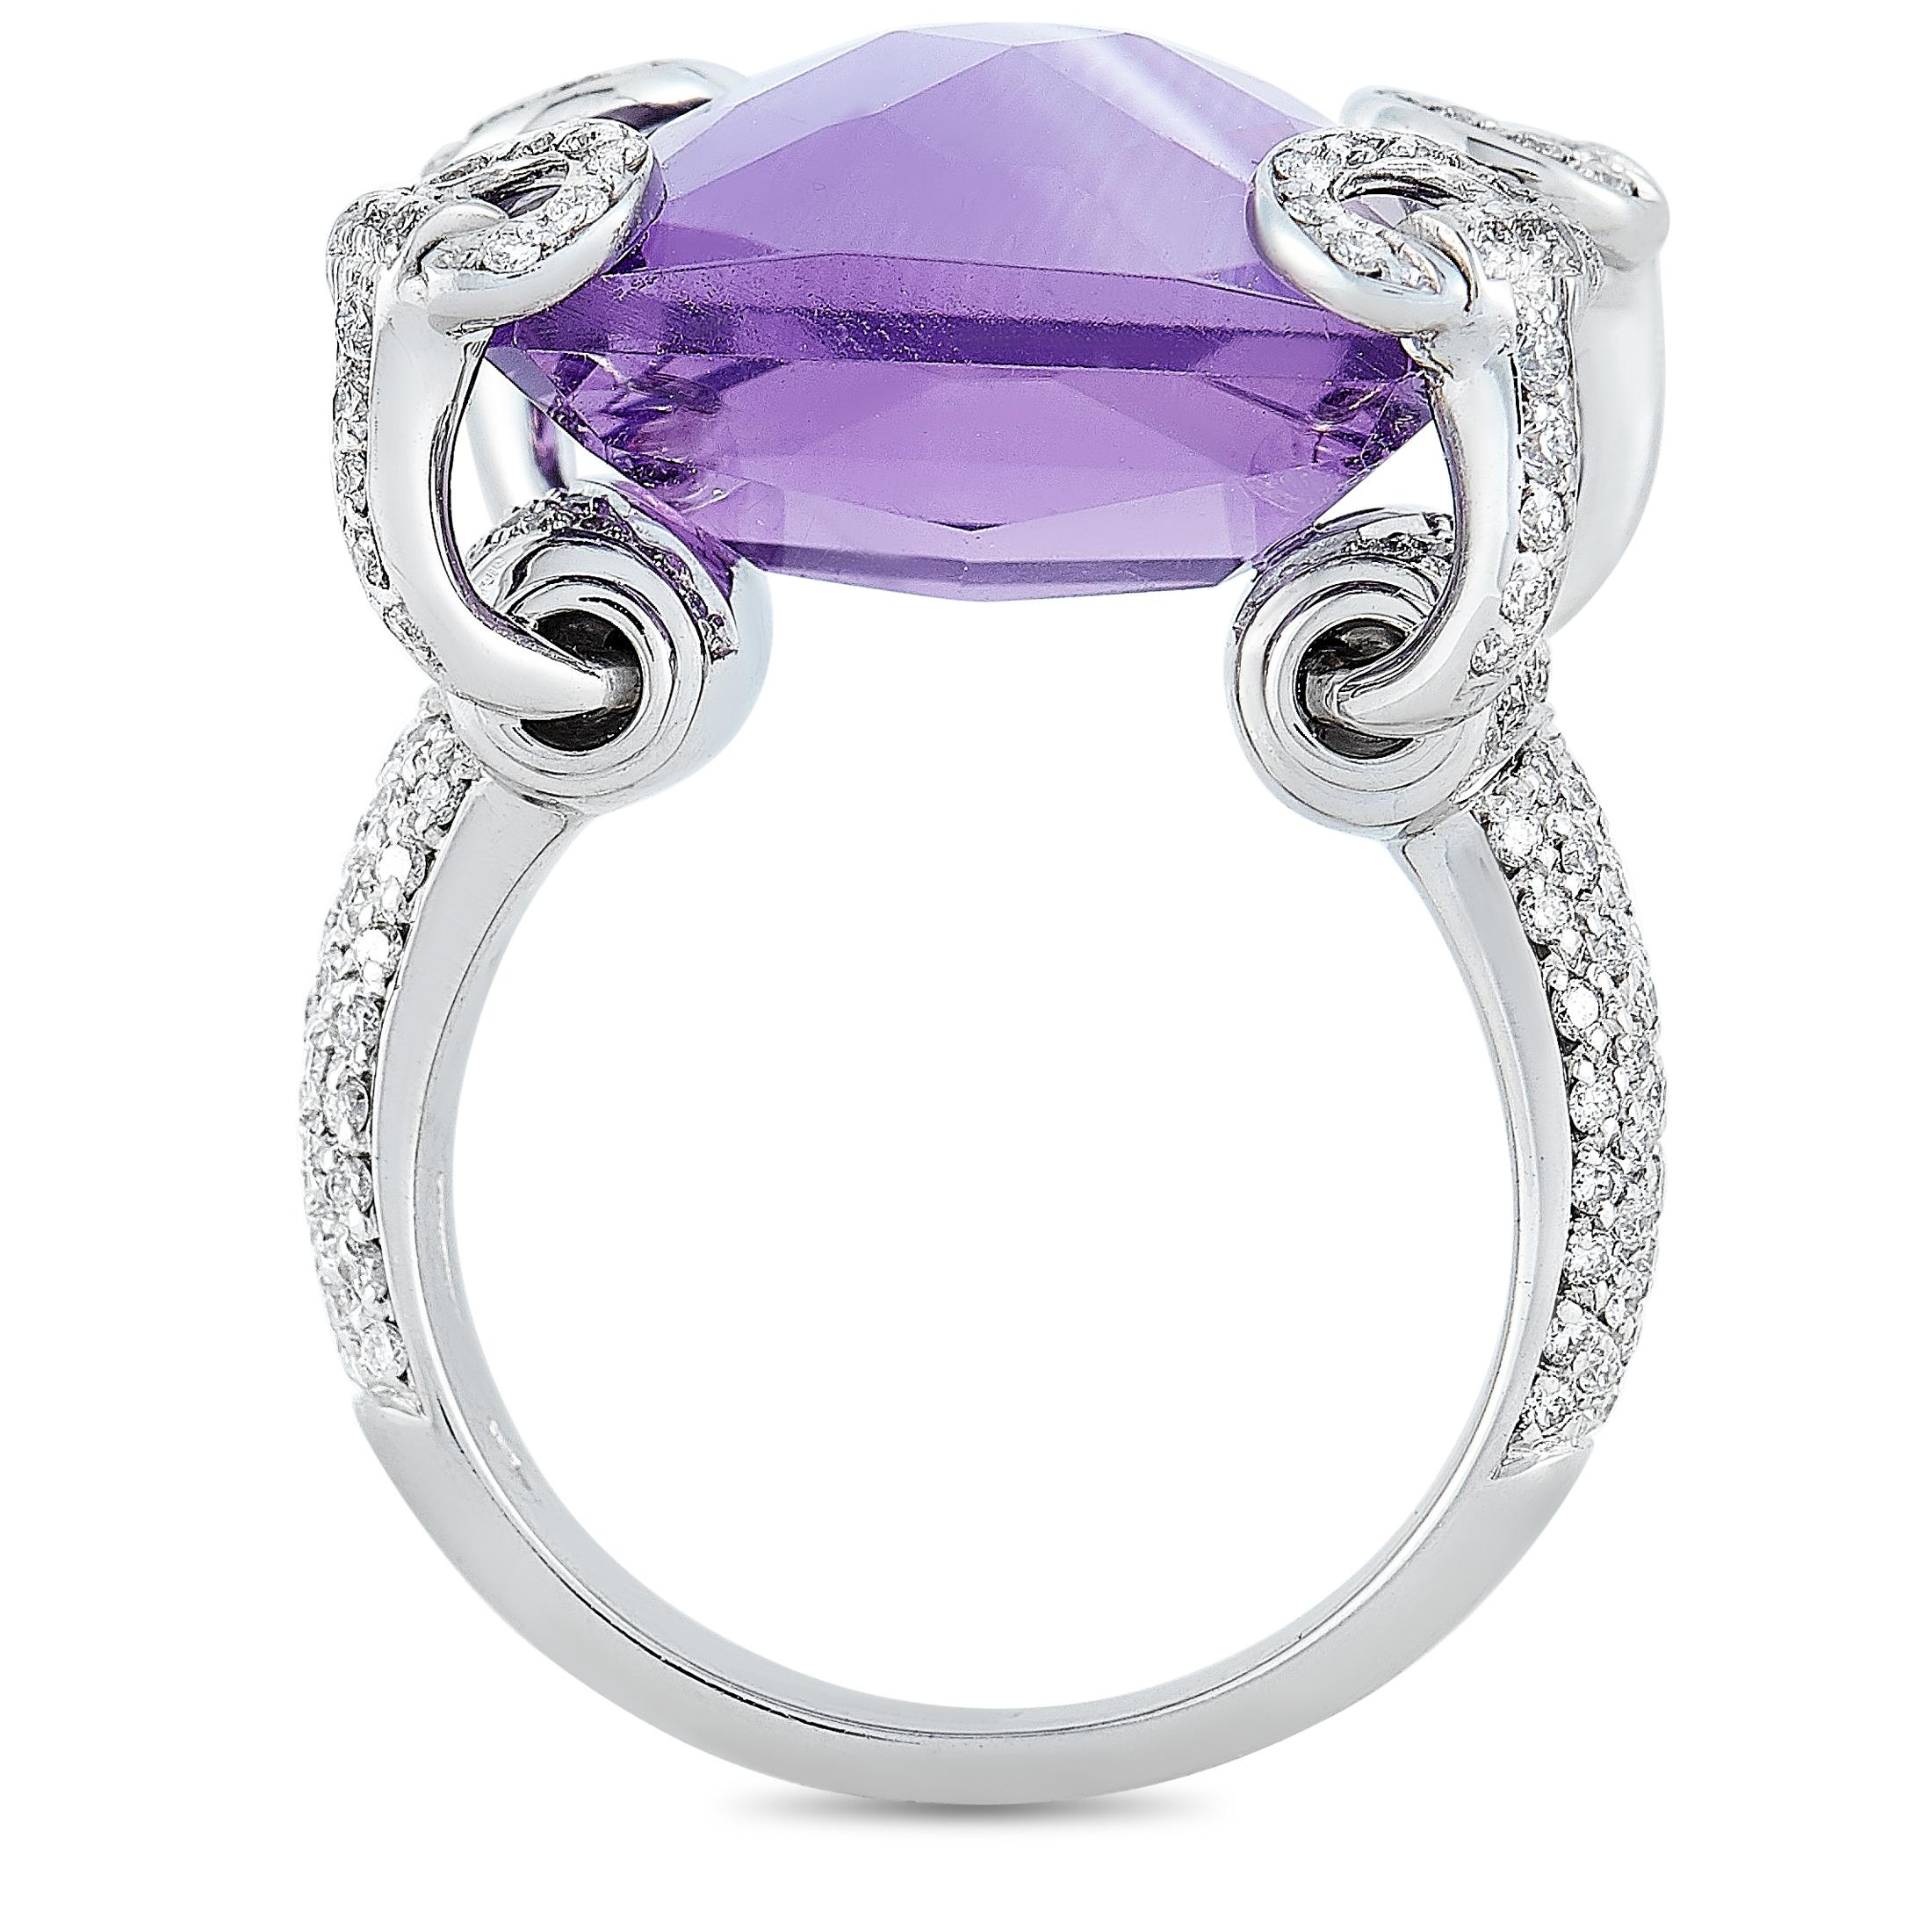 The Gucci “Horsebit” ring is made of 18K white gold and embellished with a 21.00 ct amethyst and a total of 1.47 carats of diamonds. The ring weighs 11.9 grams and boasts band thickness of 4 mm and top height of 10 mm, while top dimensions measure